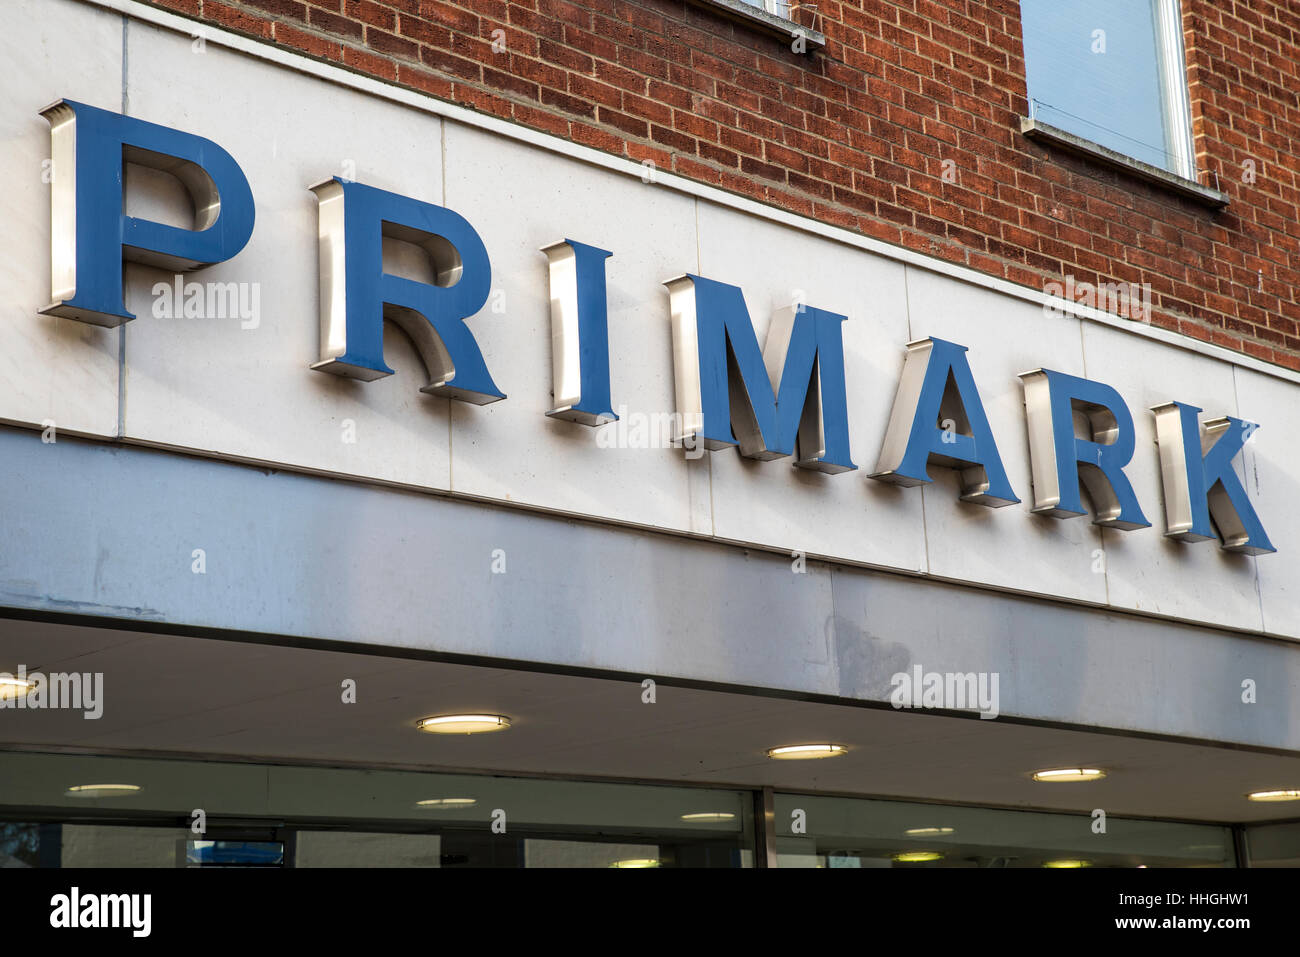 NORWICH, UK - JANUARY 17TH 2017: The Primark logo on the exterior of their store in Norwich city centre, on 17th January 2017. Stock Photo